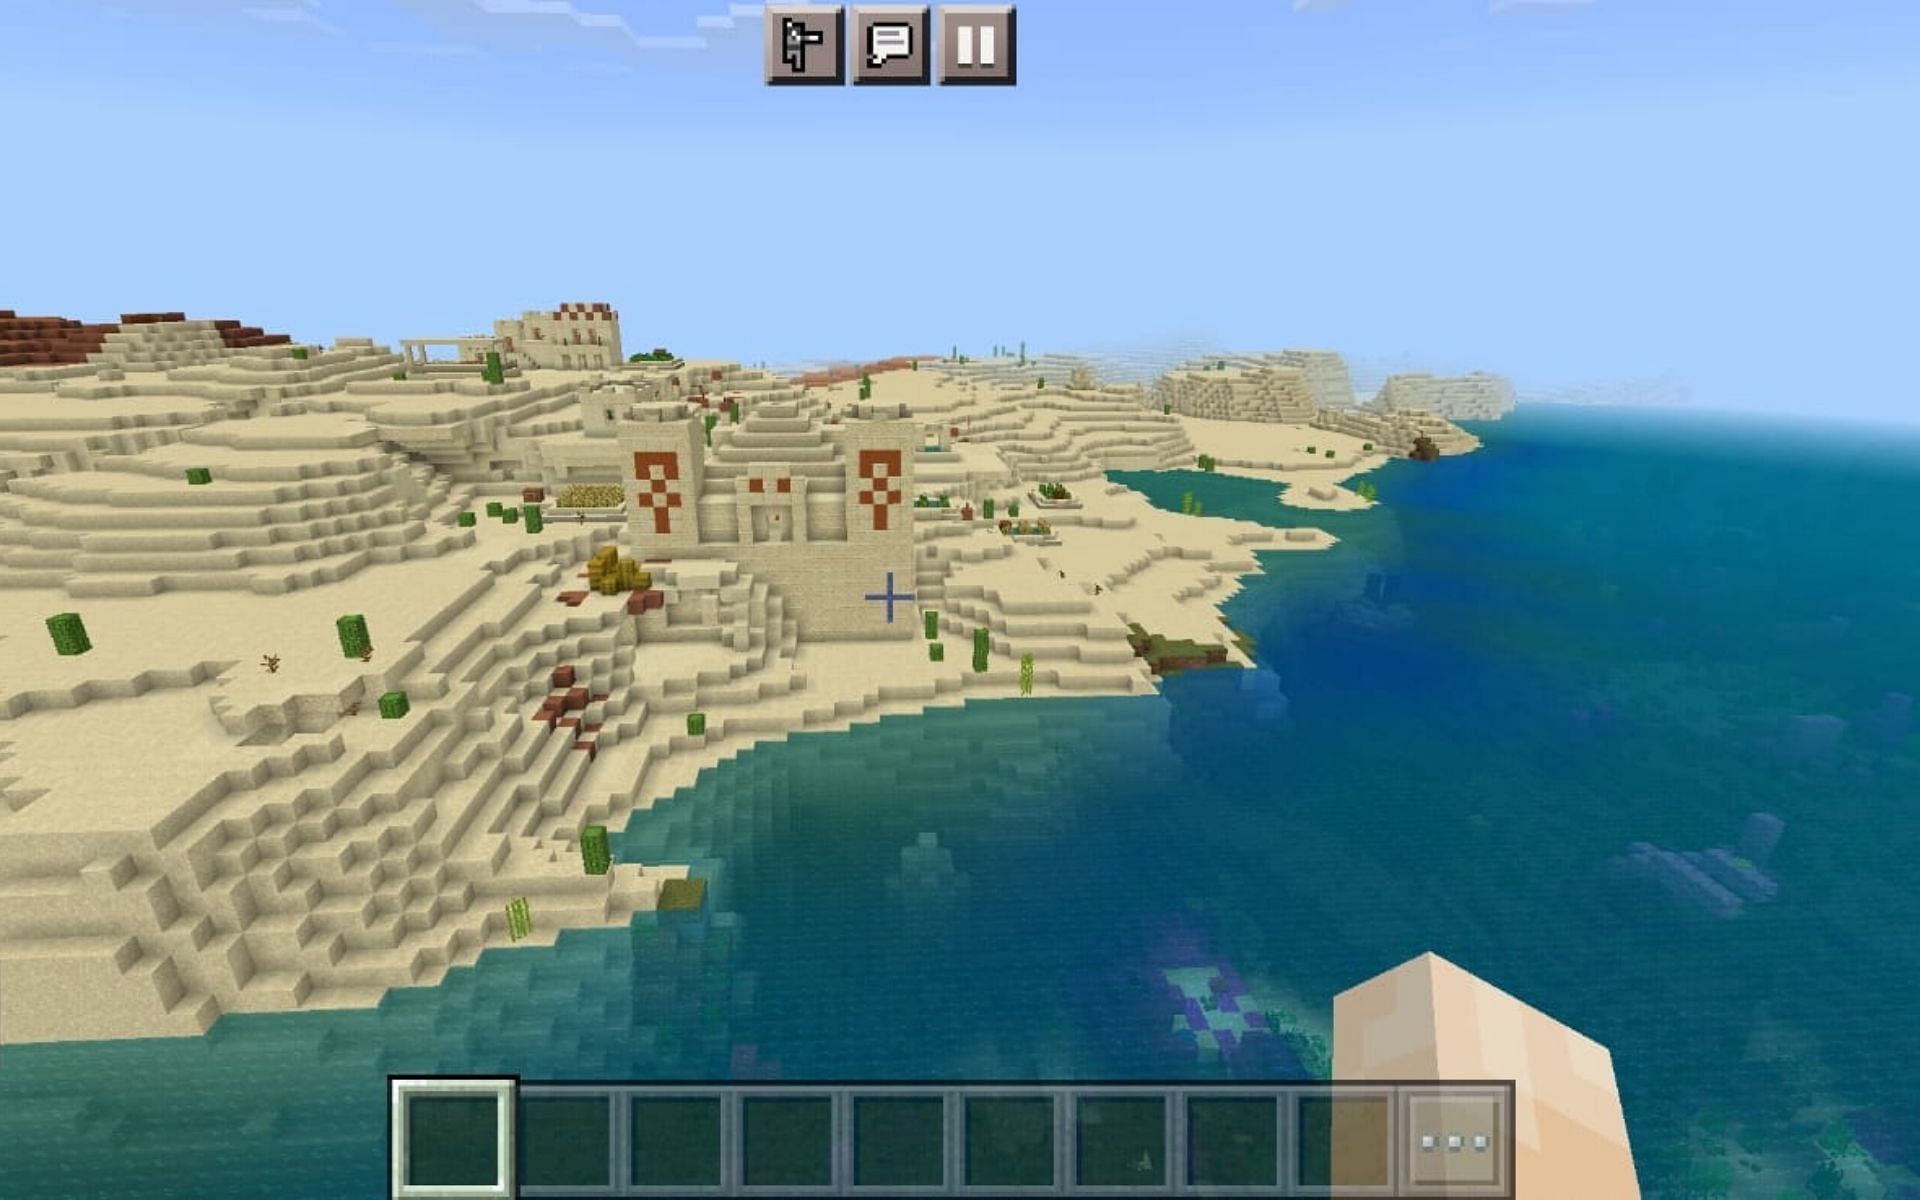 Spawning within a Desert Temple in a Village on a Shore with Coral Reefs (Image via Minecraft)